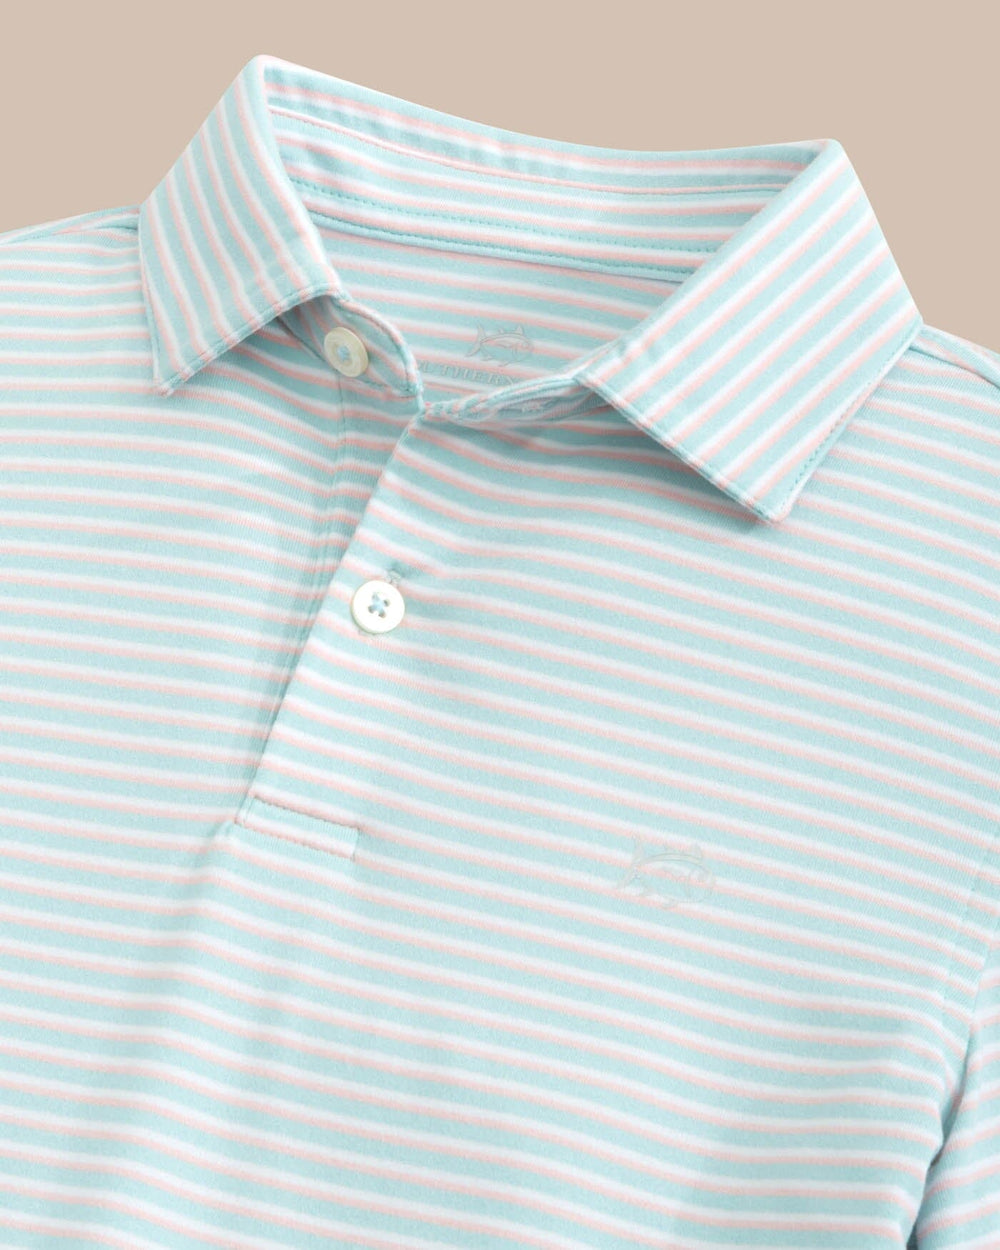 The detail view of the Southern Tide Kids Ryder Heather Halls Stripe Performance Polo by Southern Tide - Heather Wake Blue